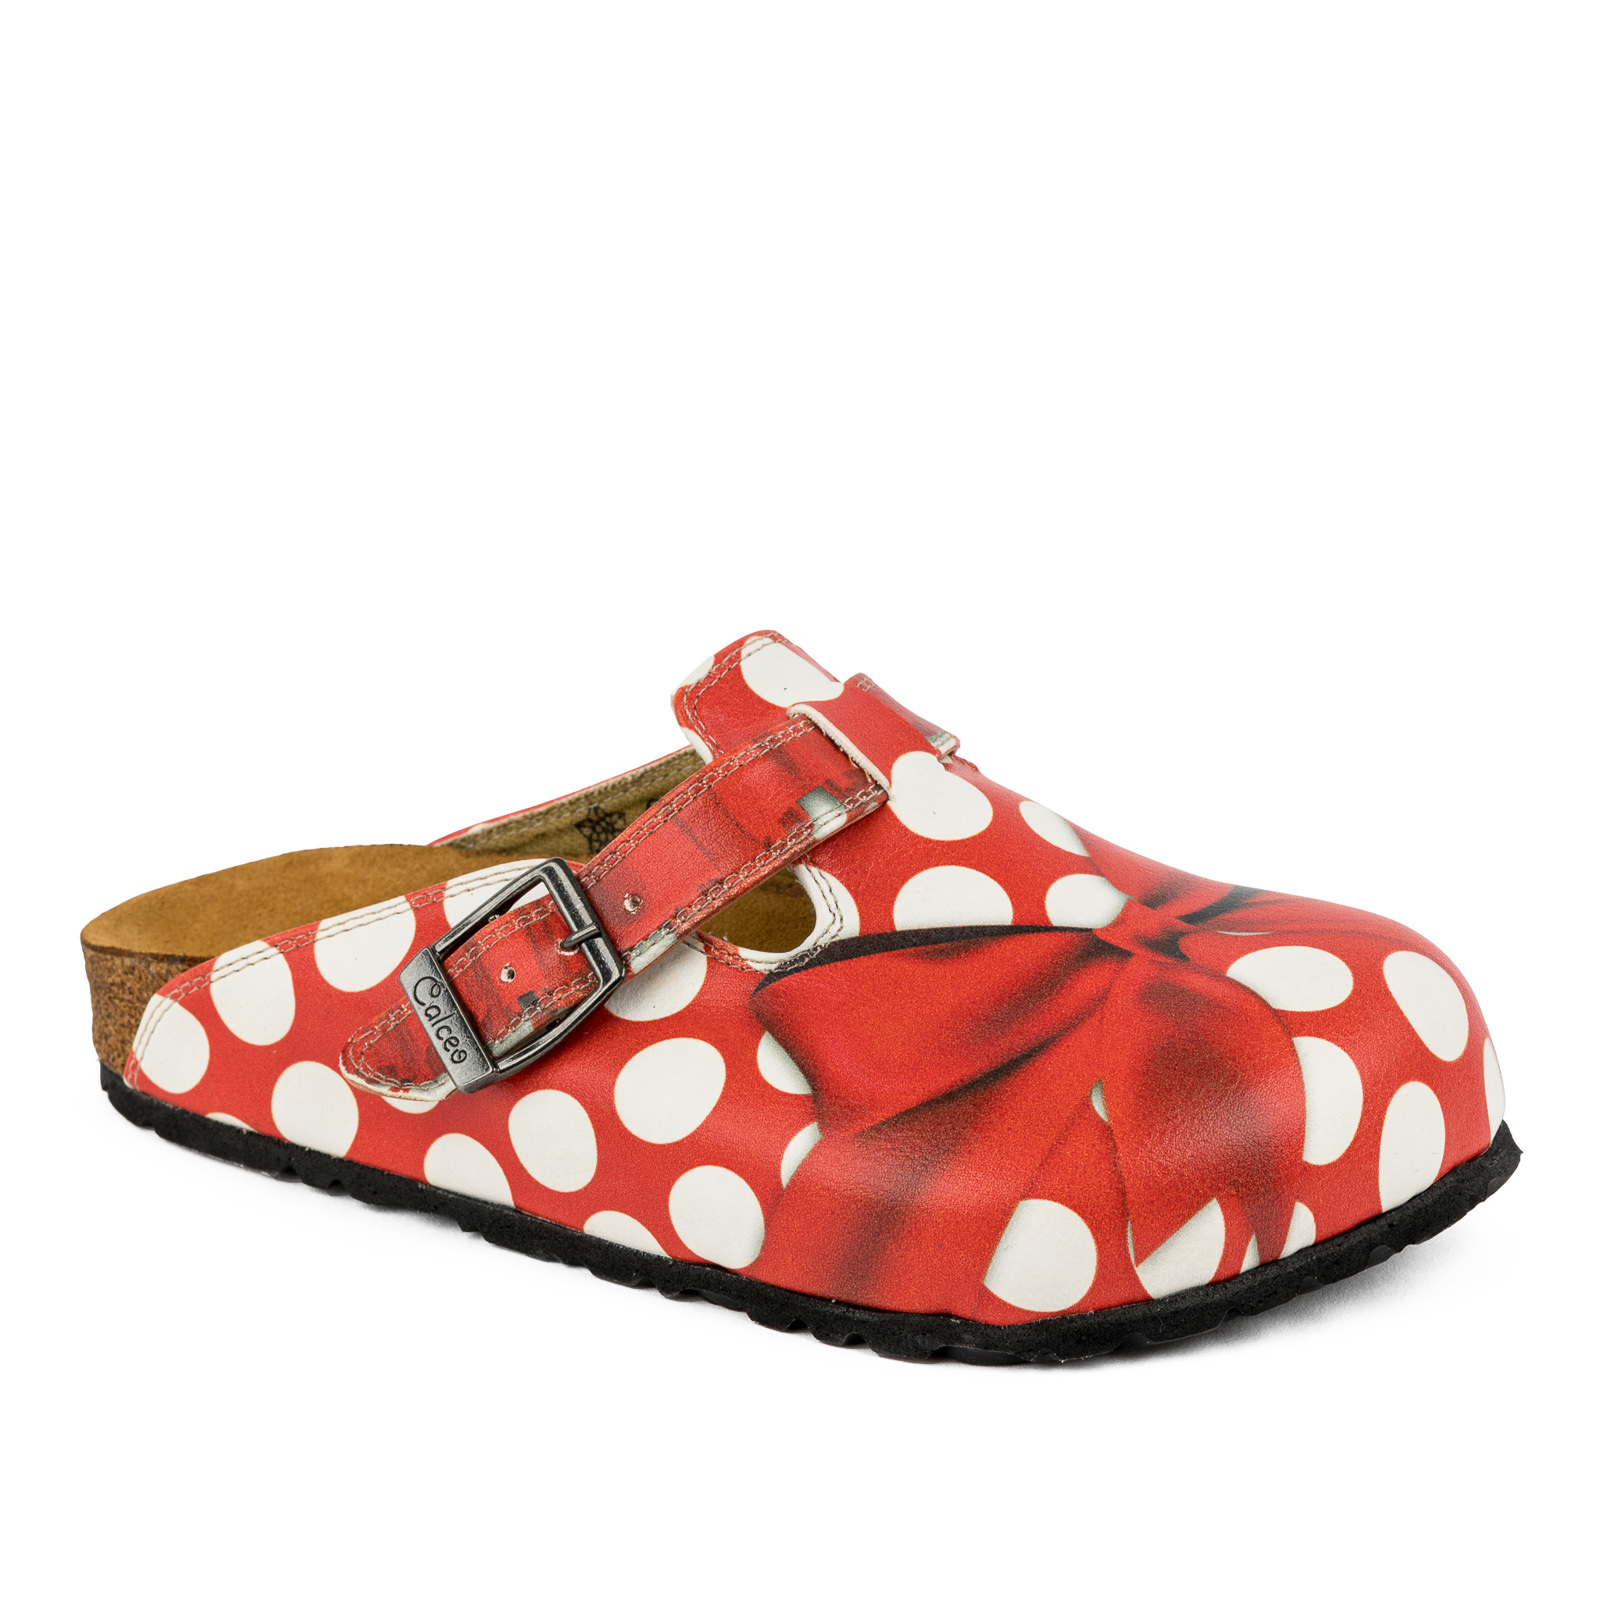 Patterned women clogs A086 - BOW - RED